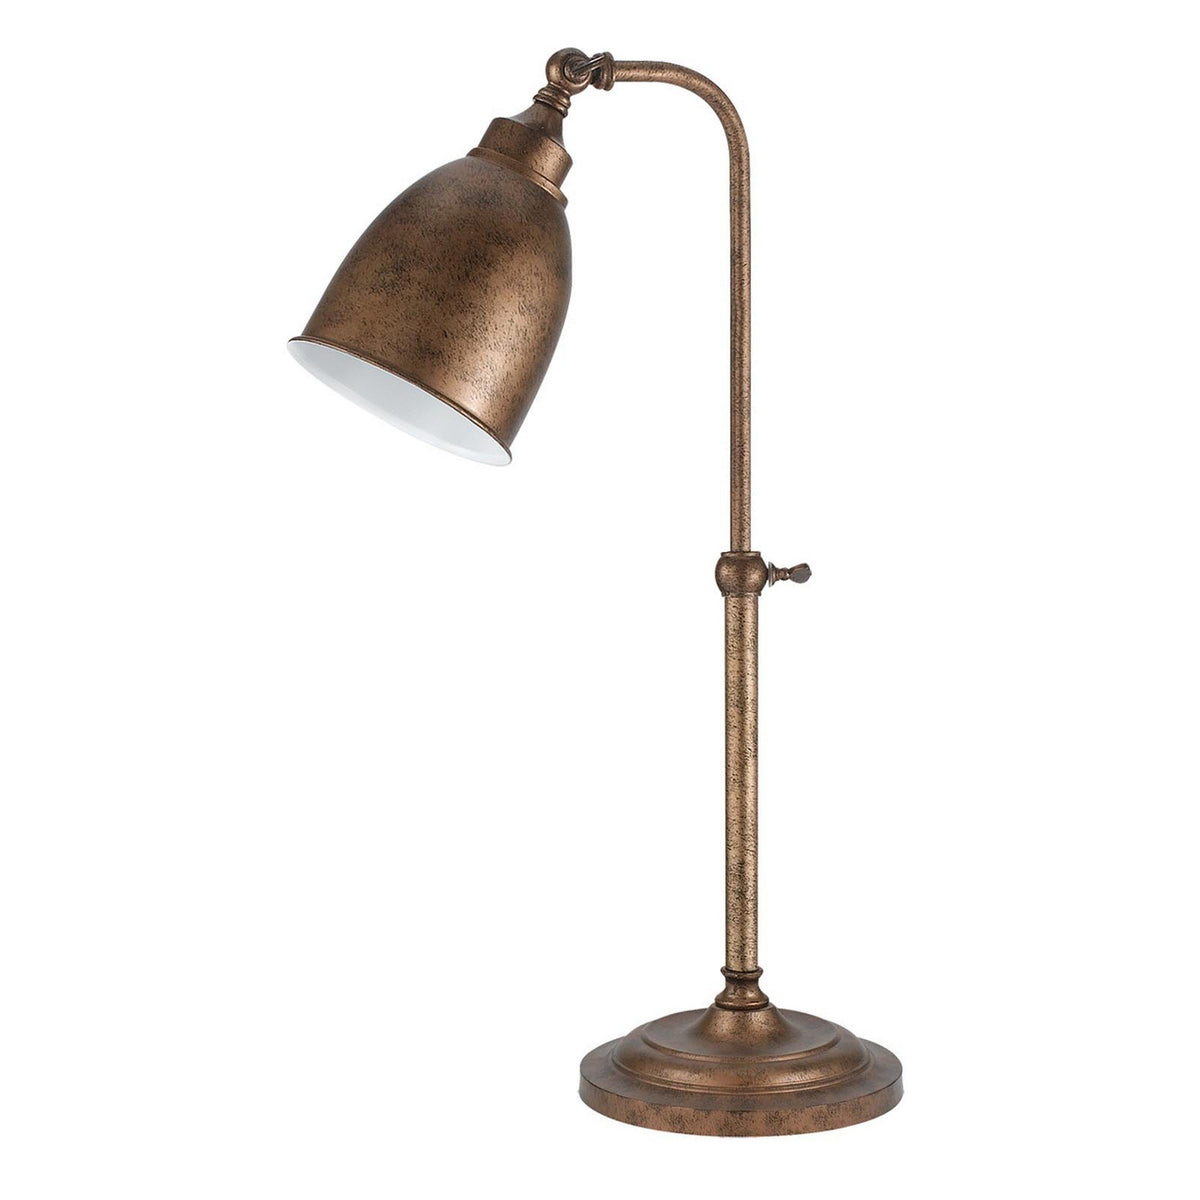 Metal Round 25" Table Lamp with Adjustable Pole, Bronze - BM225105